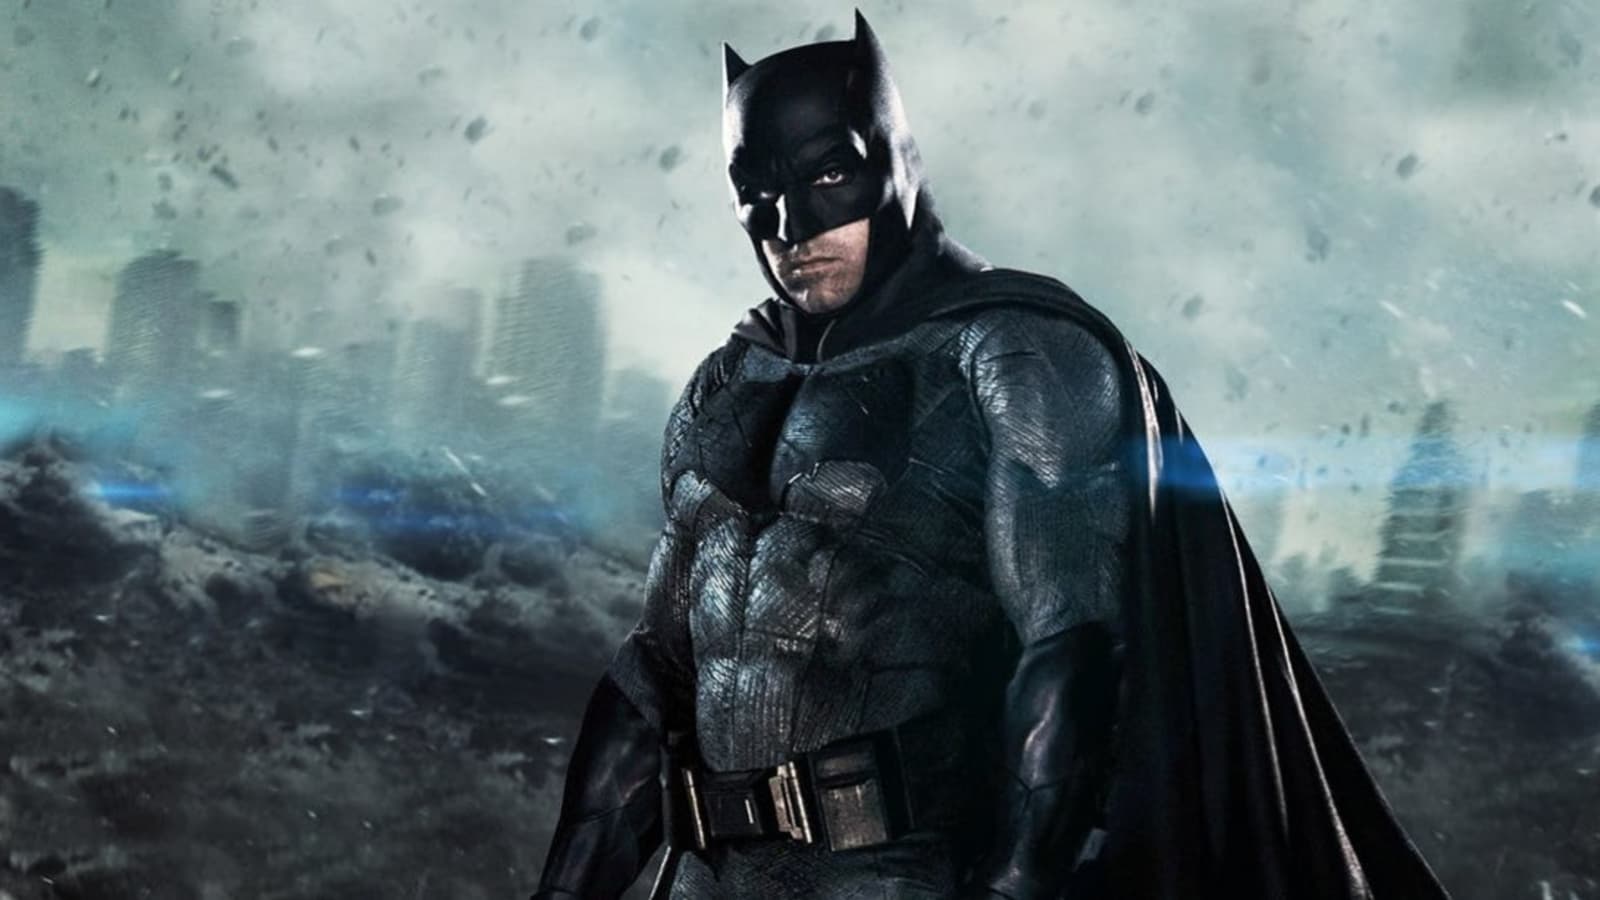 Batman turns 80 today and is still fighting crime and making money